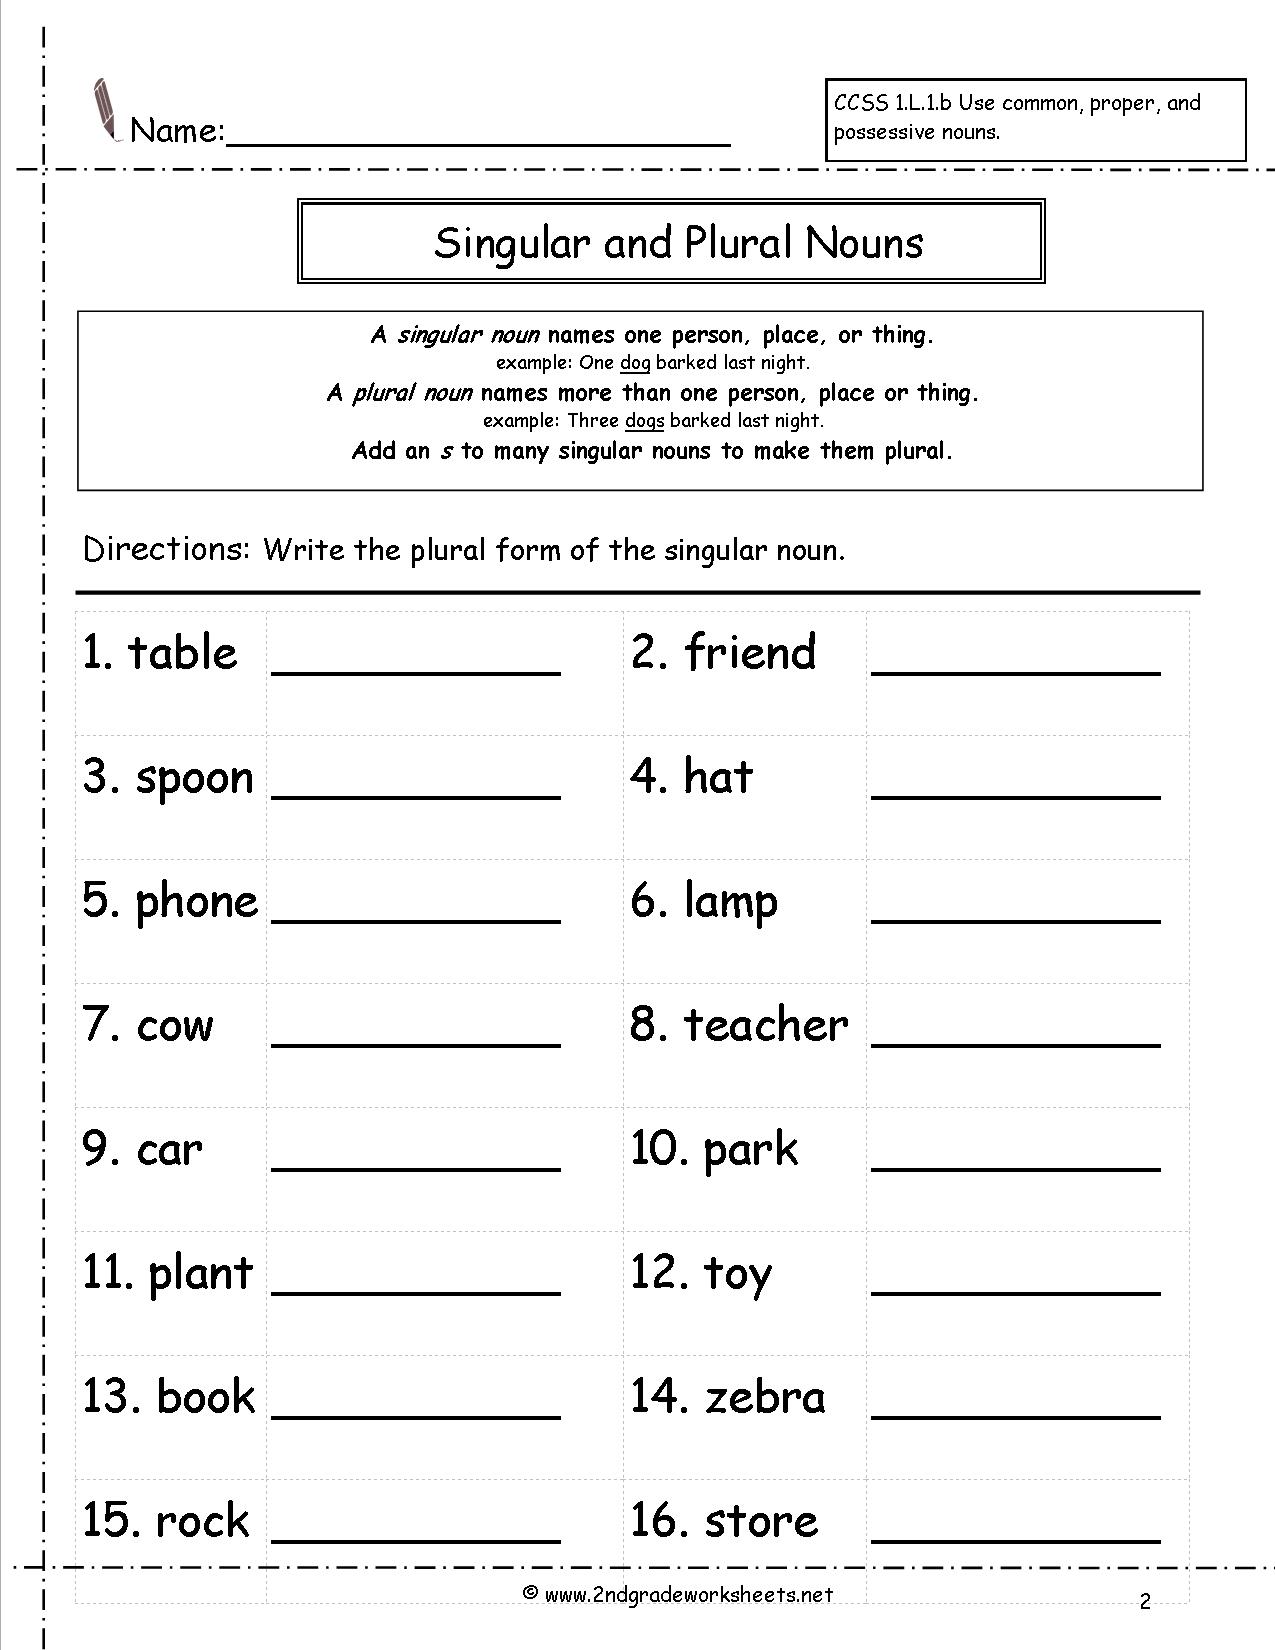 11 Best Images Of Singular And Plural Nouns Worksheets Singular Plural Nouns Worksheets